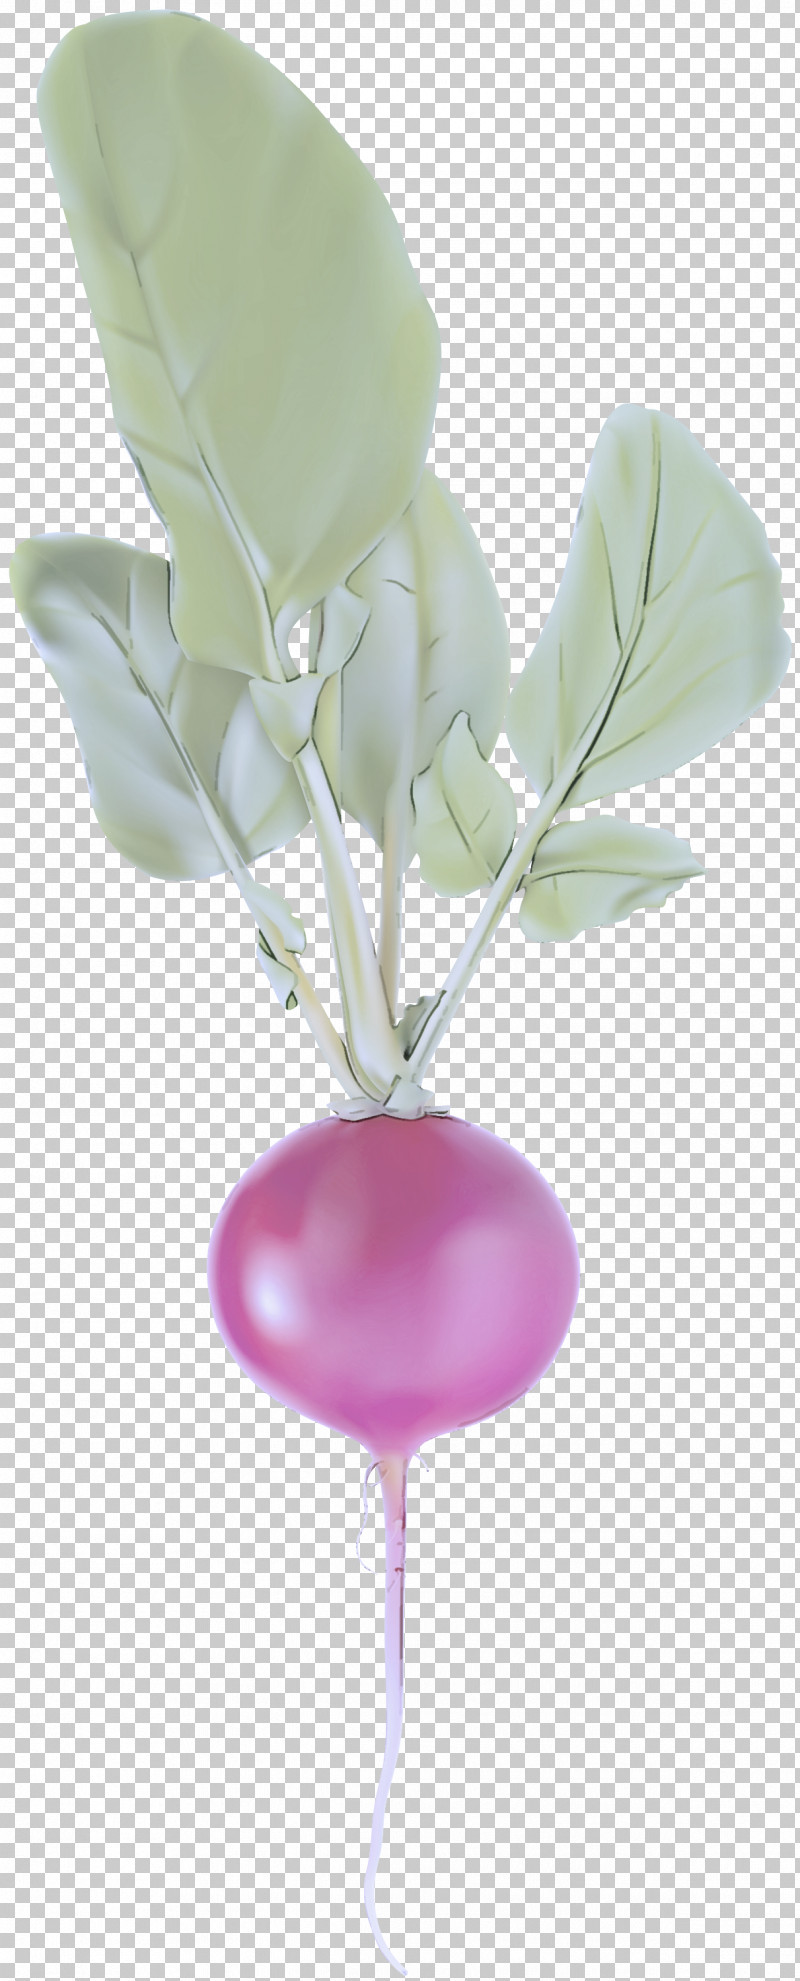 Pink Balloon Flower Plant Tulip PNG, Clipart, Anthurium, Balloon, Cut Flowers, Flower, Magnolia Free PNG Download